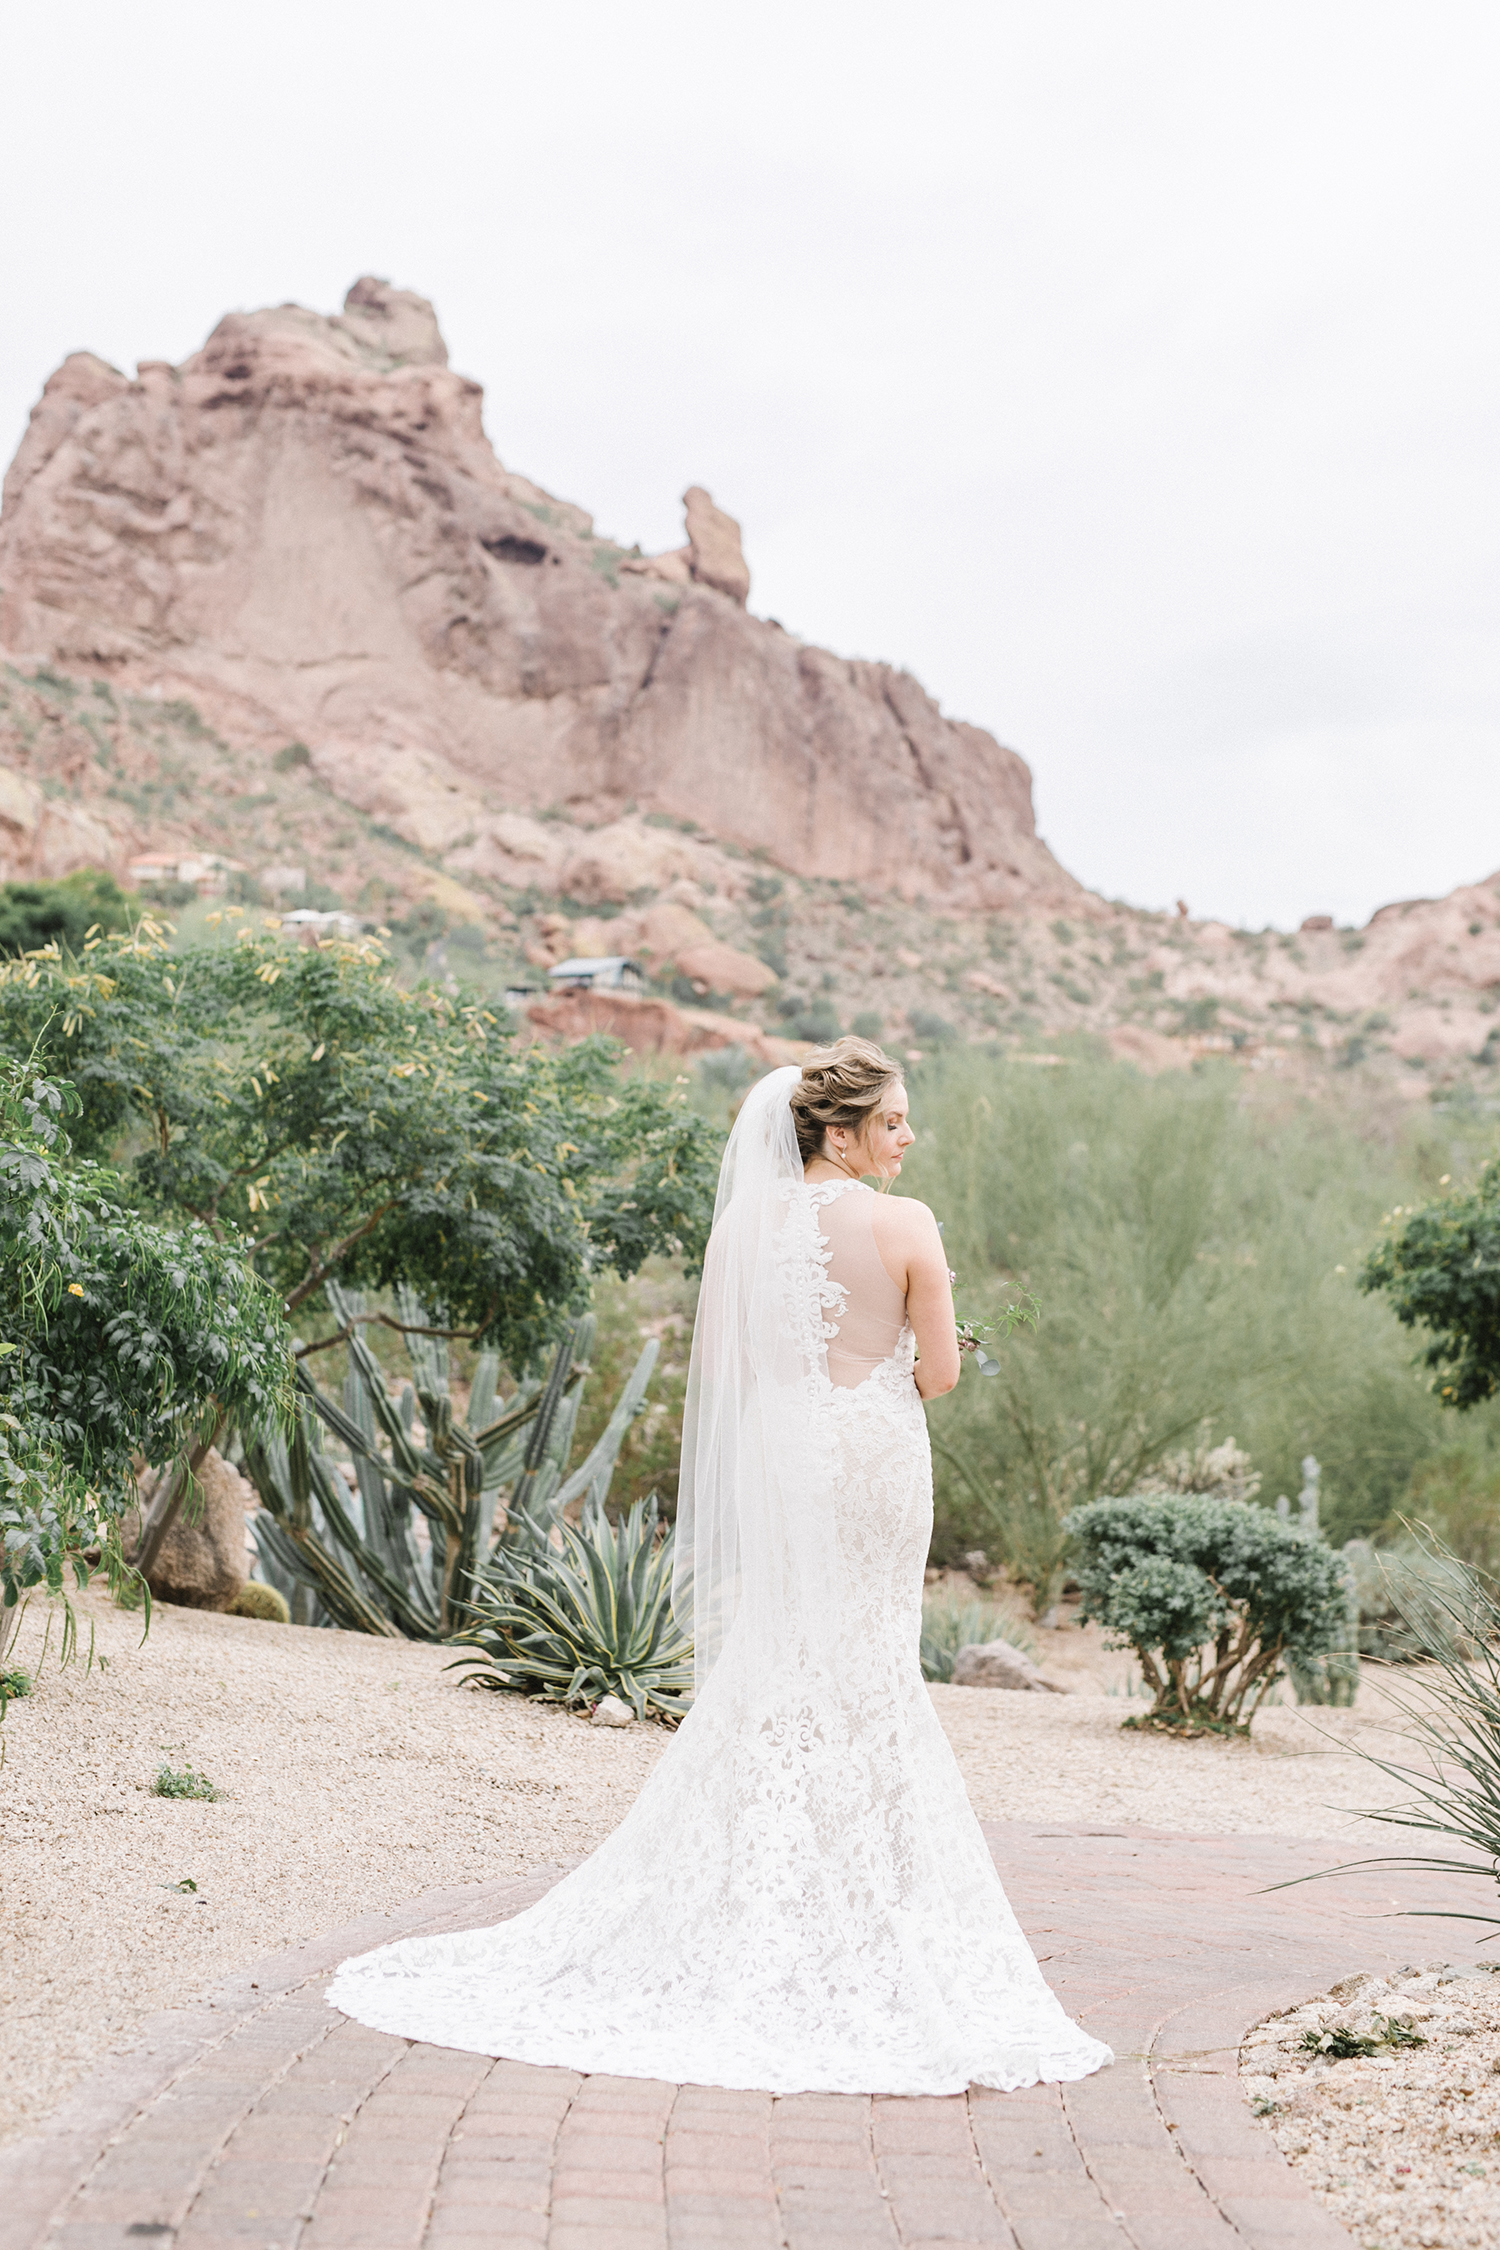 Hannah and Steven's Wedding at Sanctuary Resort in Scottsdale, Arizona. Get a look inside on the blog! #ArizonaWedding #ArizonaWeddingPhotographer #DesertWedding #SanctuaryResort #ScottsdaleArizona #WeddingIdeas #WeddingDecor